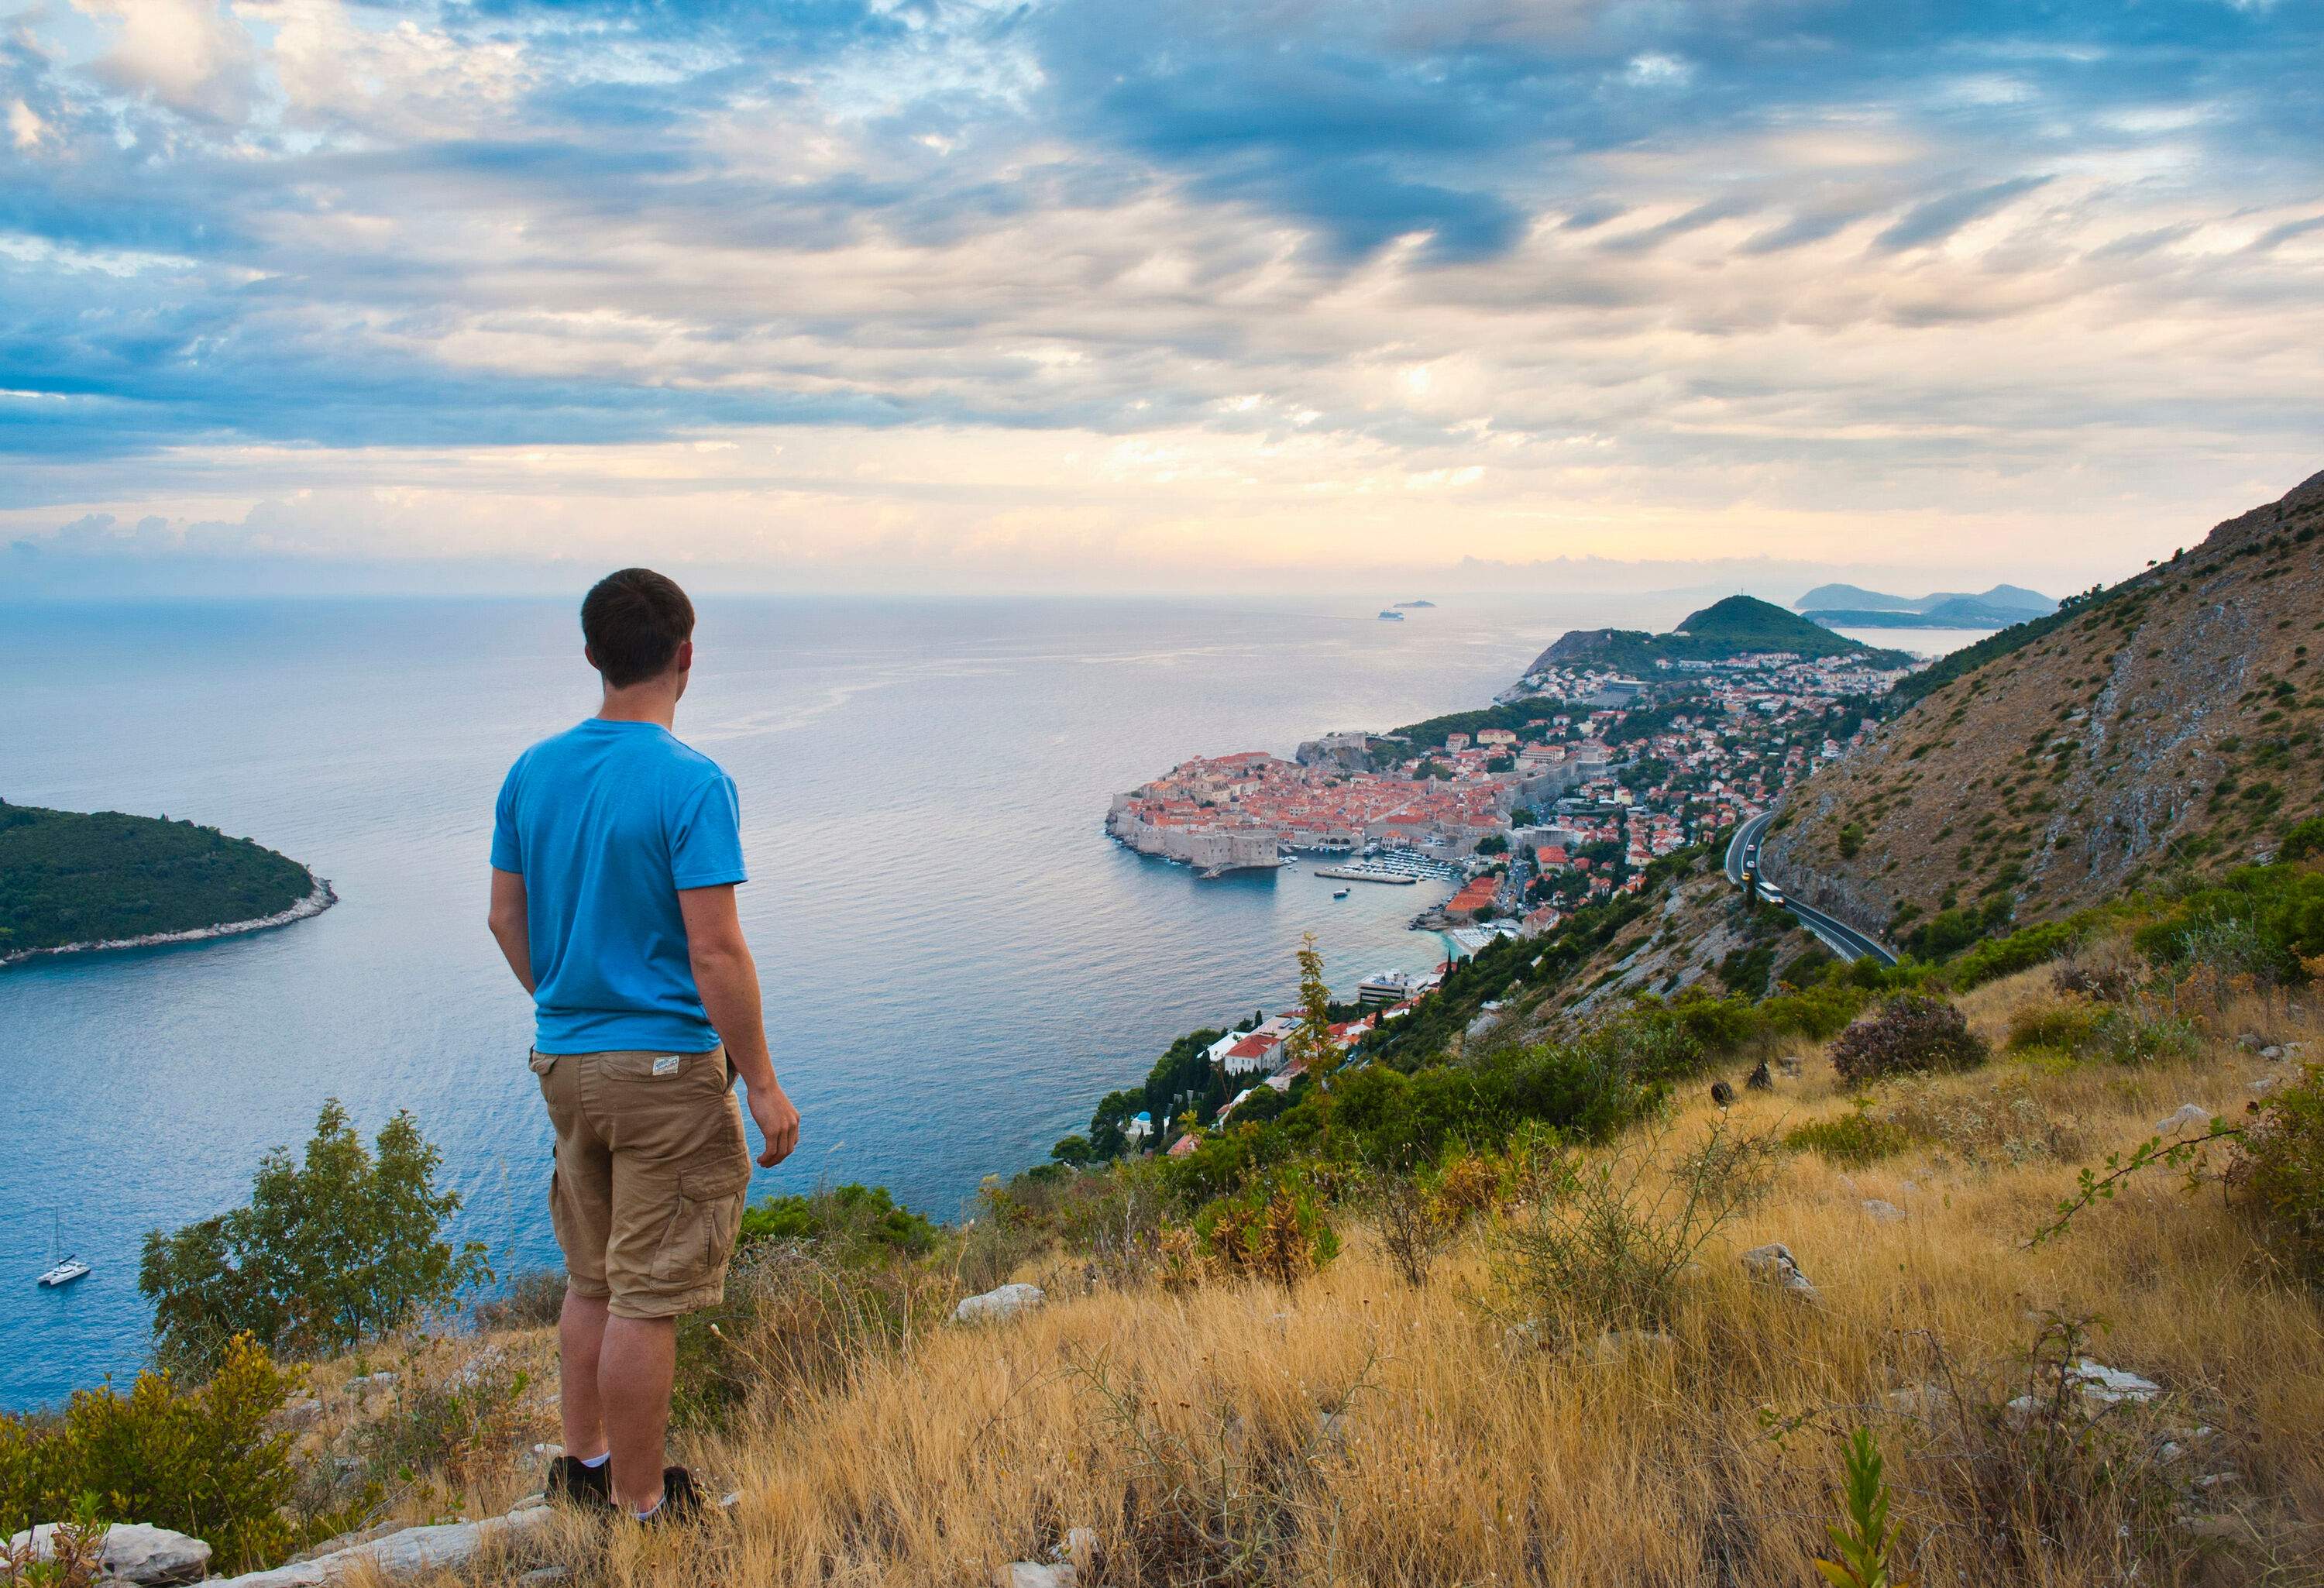 A man standing on the hillside and admiring the view of the sea and the city below.